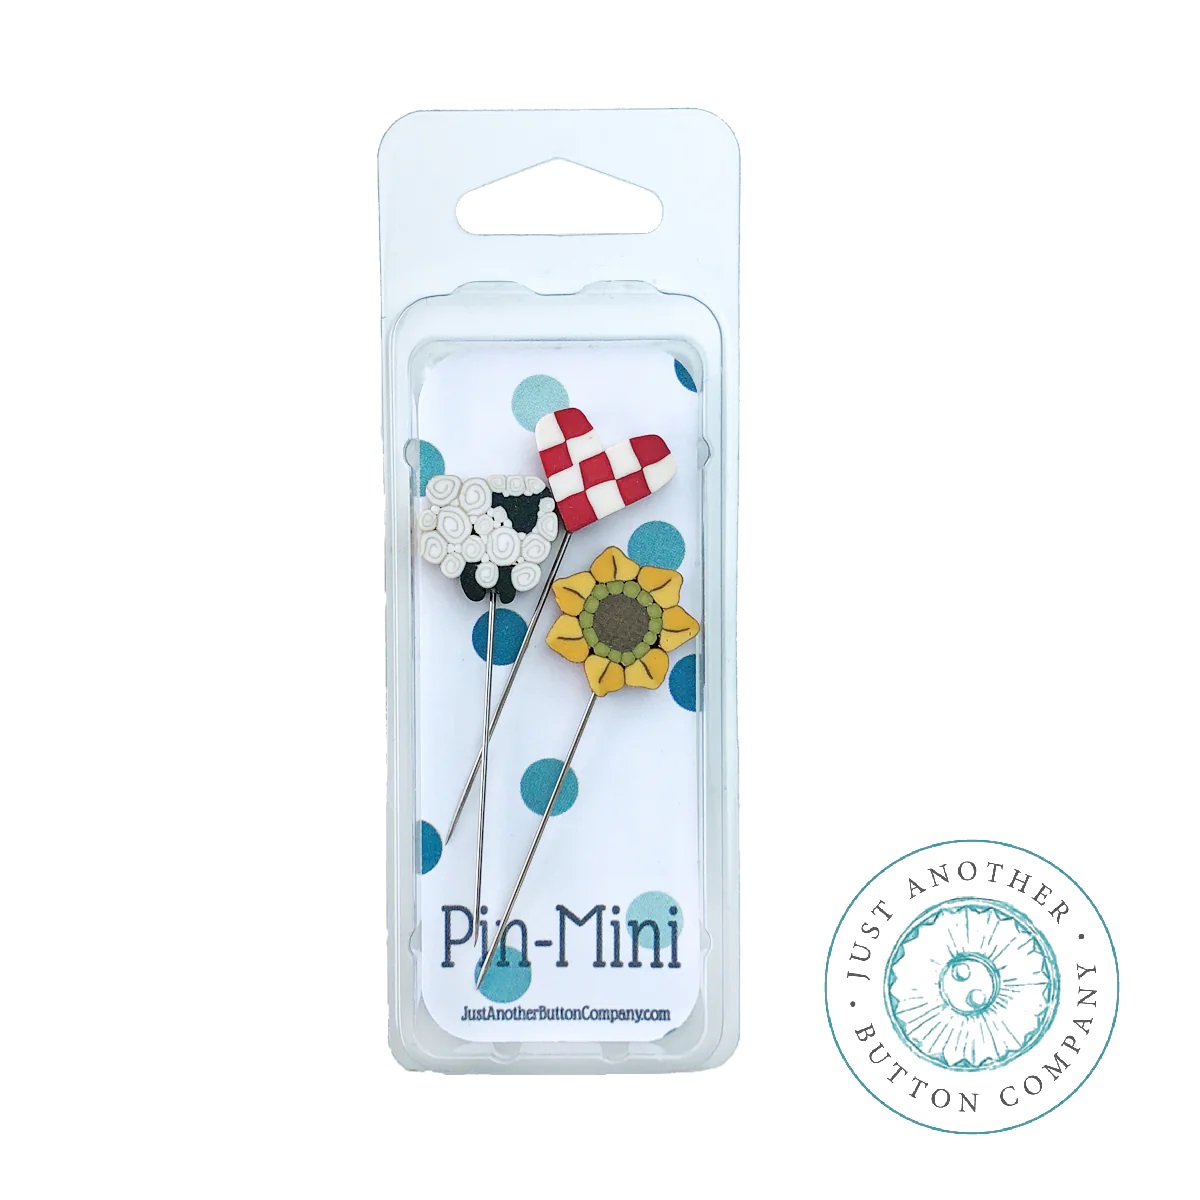 jpm455 On the Farm : Pin-Mini :  by Just Another Button Company  